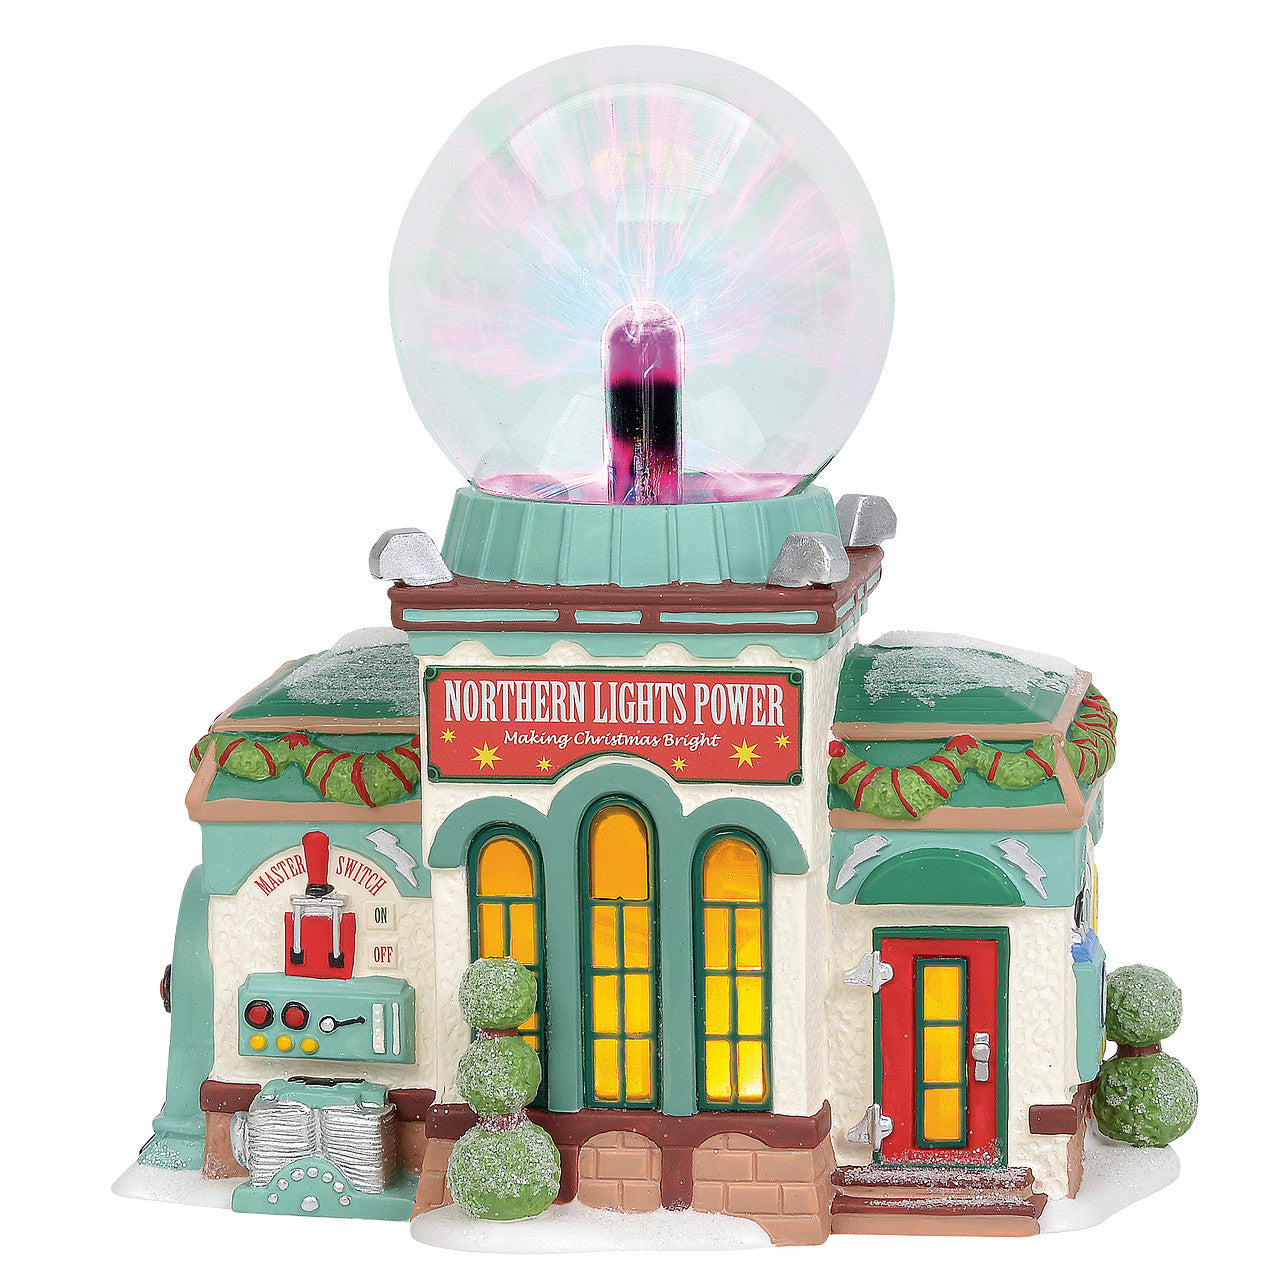 Department 56 North Pole Village Northern Lights Power Lit Building  Running a toy workshop around the clock uses a lot of electricity. Thankfully for Santa, elf scientists have harnessed the power of the Northern Lights into a limitless source of clean energy.